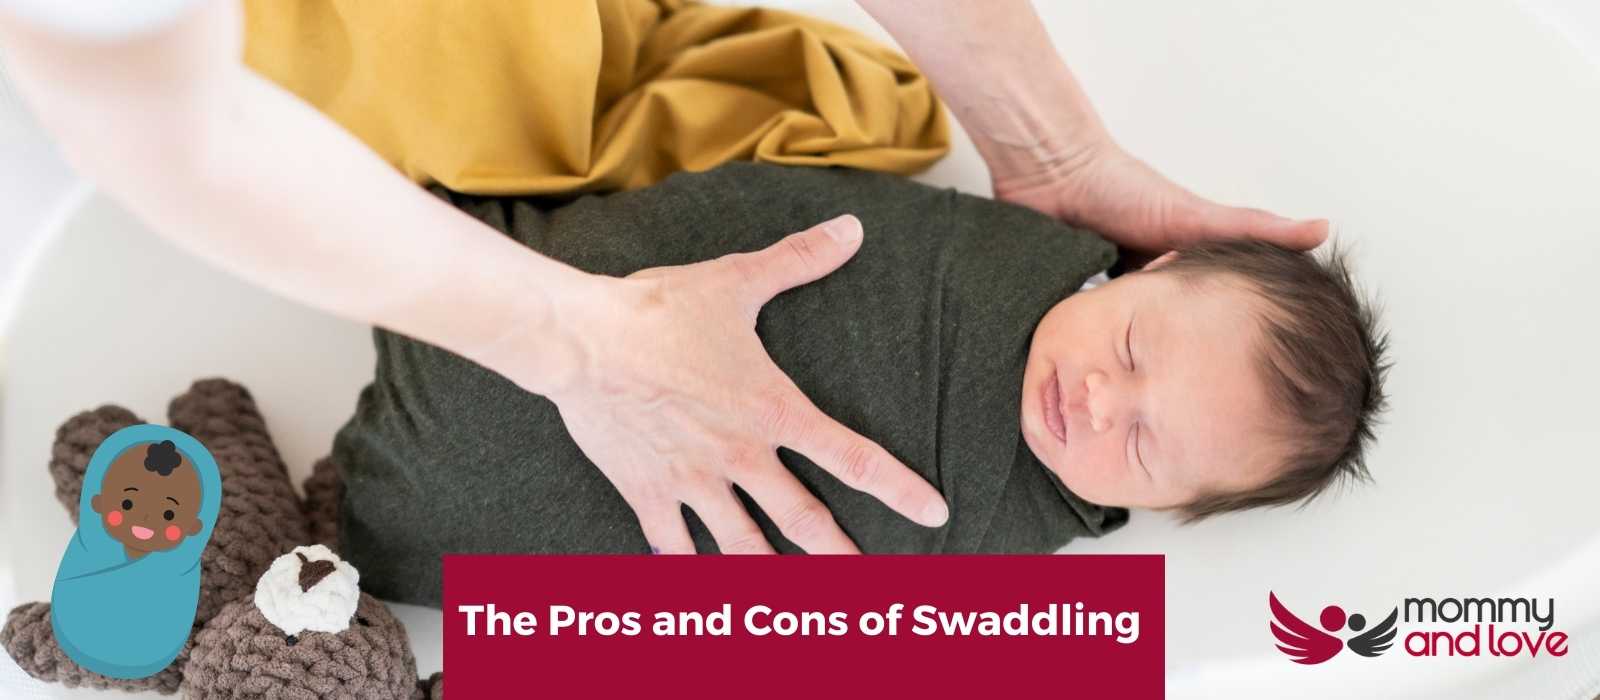 Do You Have to Swaddle a Newborn Baby? The Pros and Cons of Swaddling